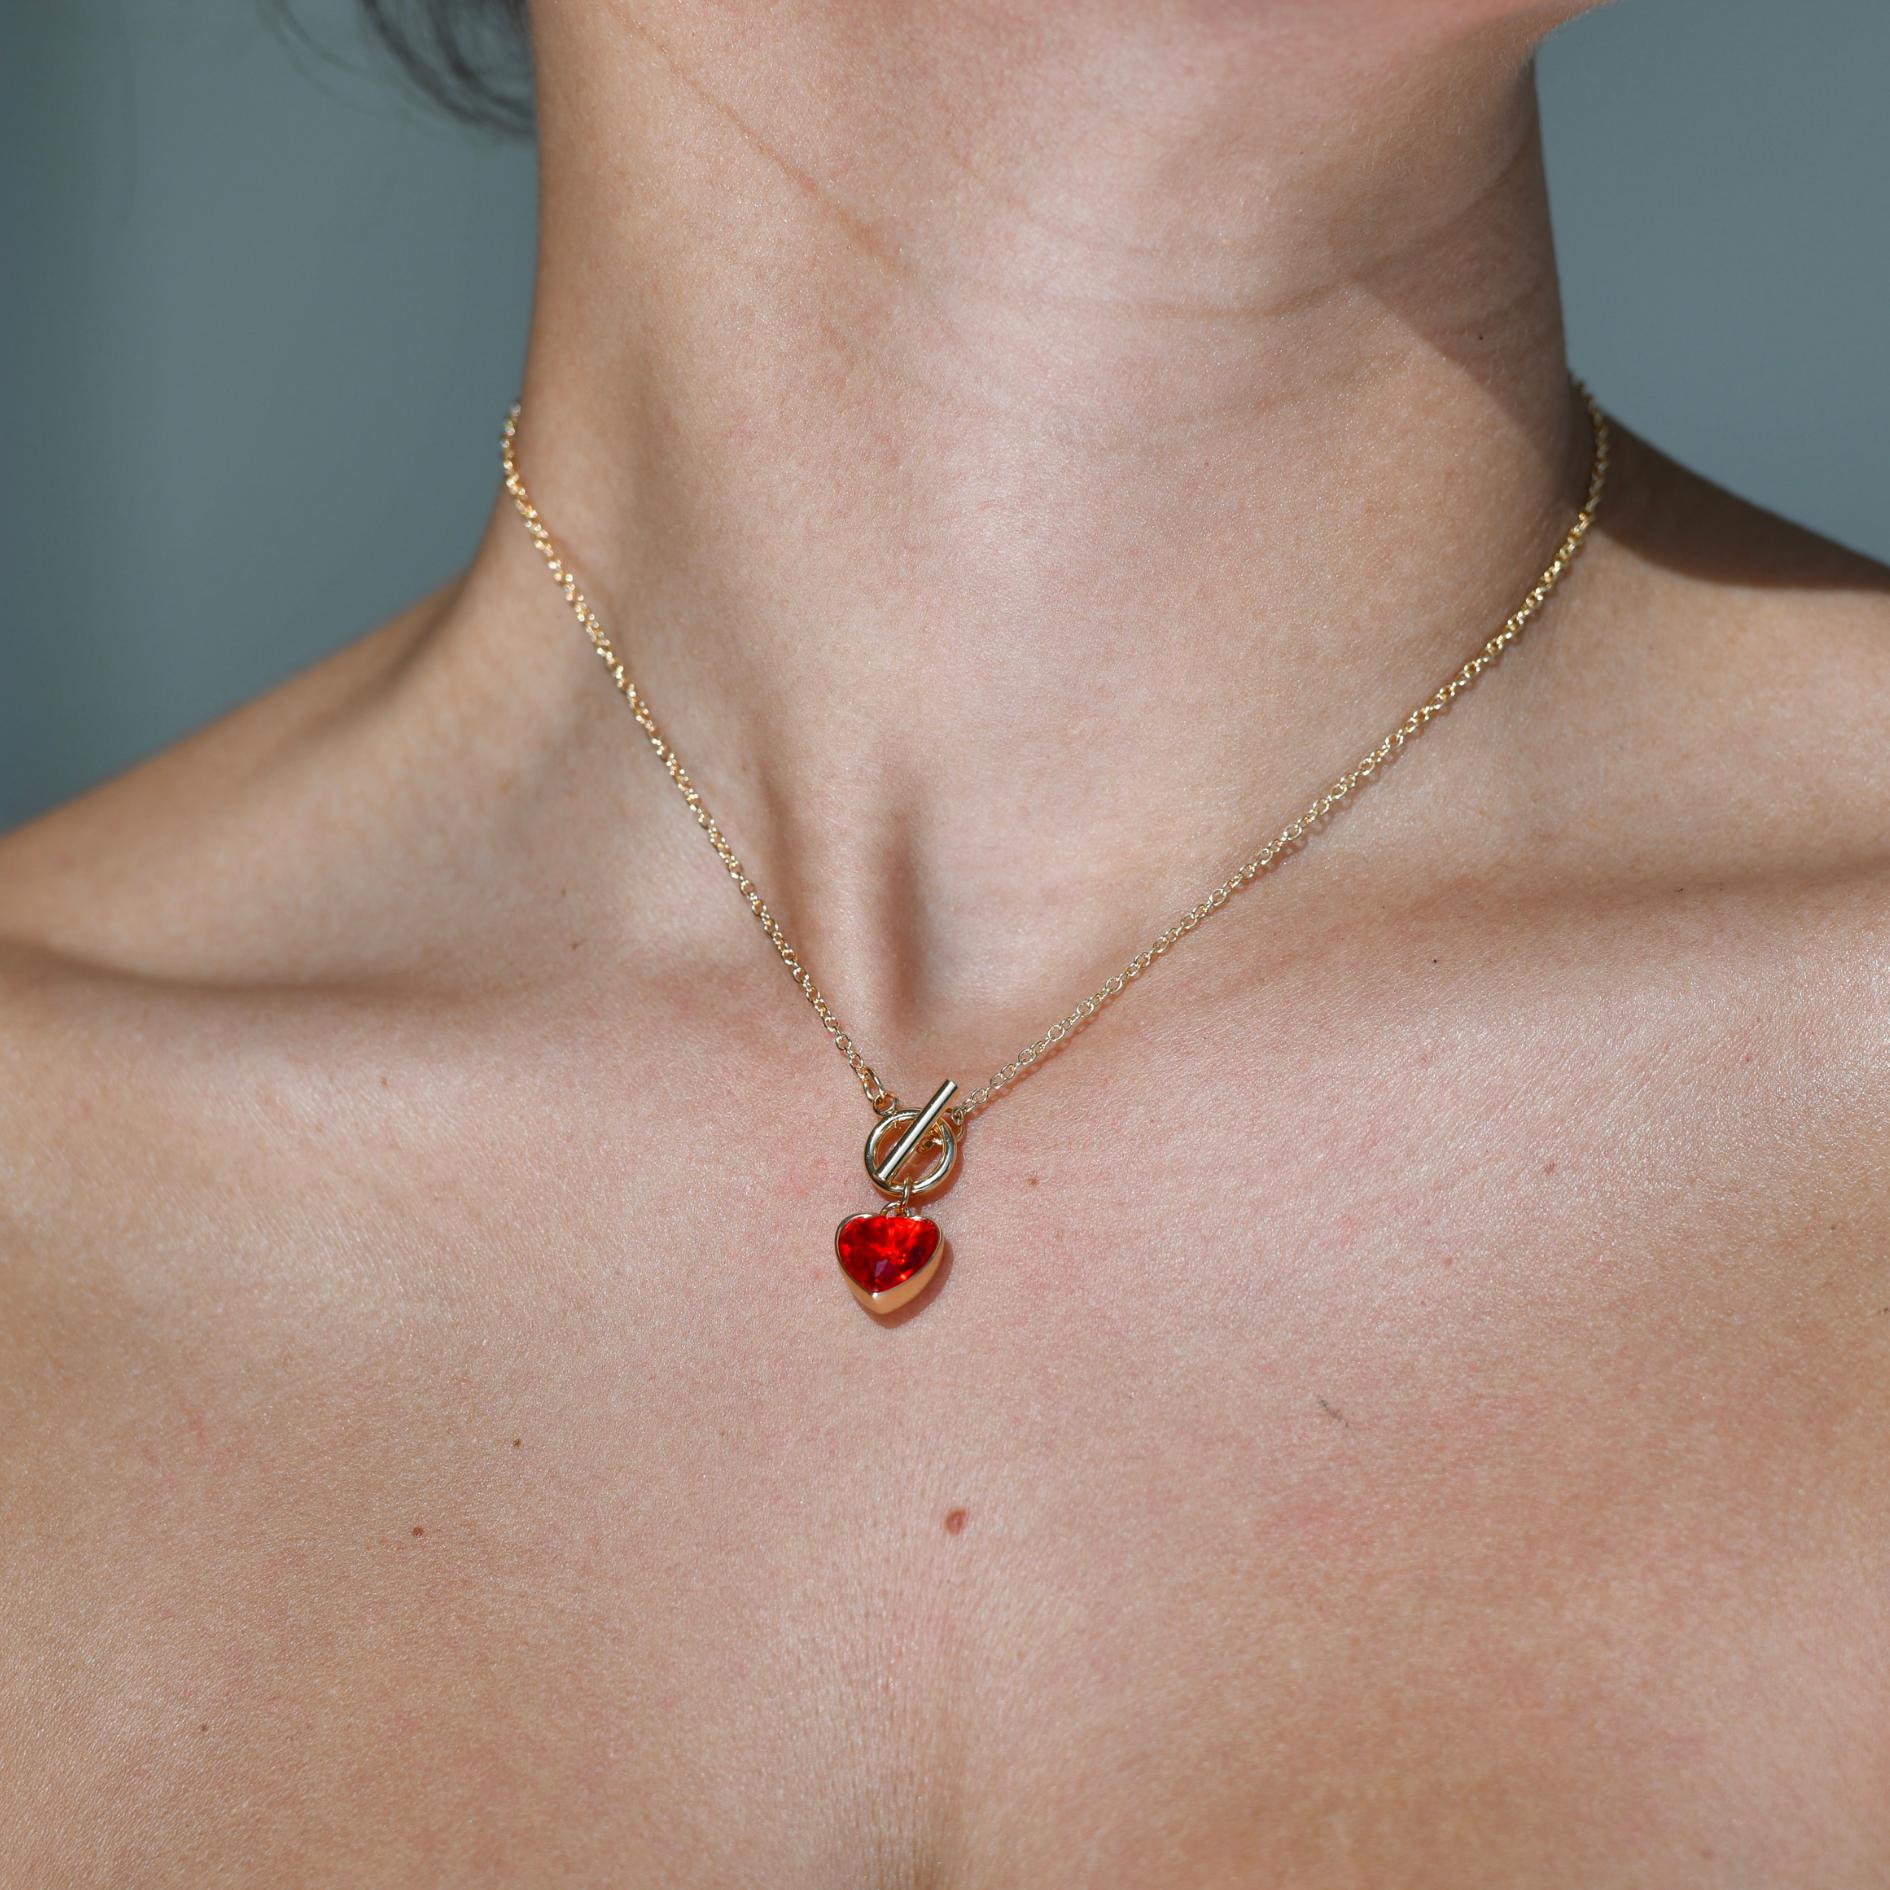 Gold plated chain heart. Heart shape pandendt with a red heart zircon on it. Rouge Heart Chain Waterproof Necklace